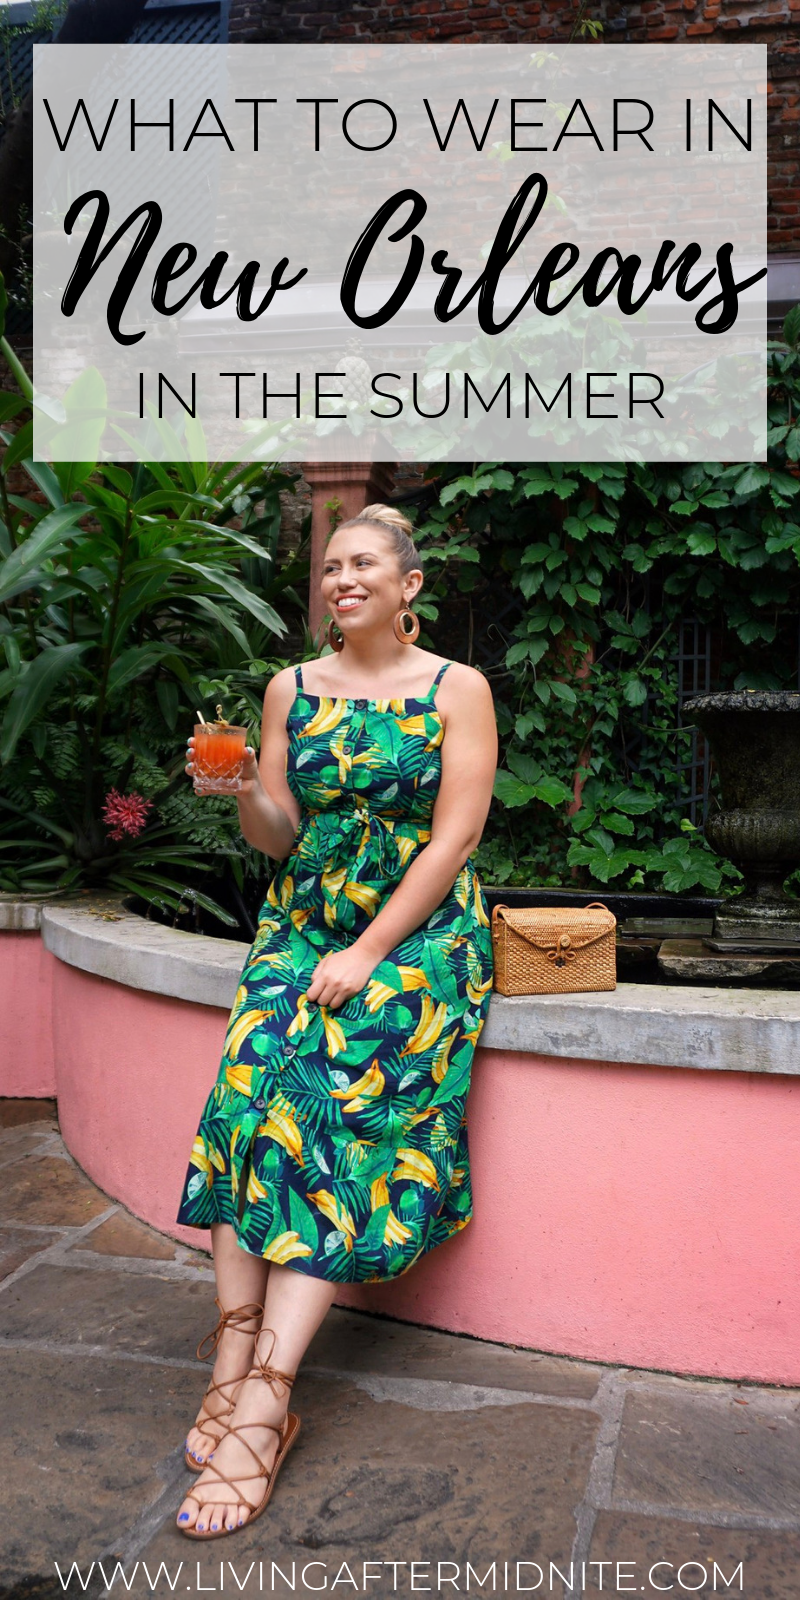 6 Outfits You Can Actually Wear in New Orleans in the Summer | What to Wear in New Orleans in the Summer | New Orleans Packing List | Summer in New Orleans | Best Outfits to Wear in New Orleans | What I Packed for New Orleans 